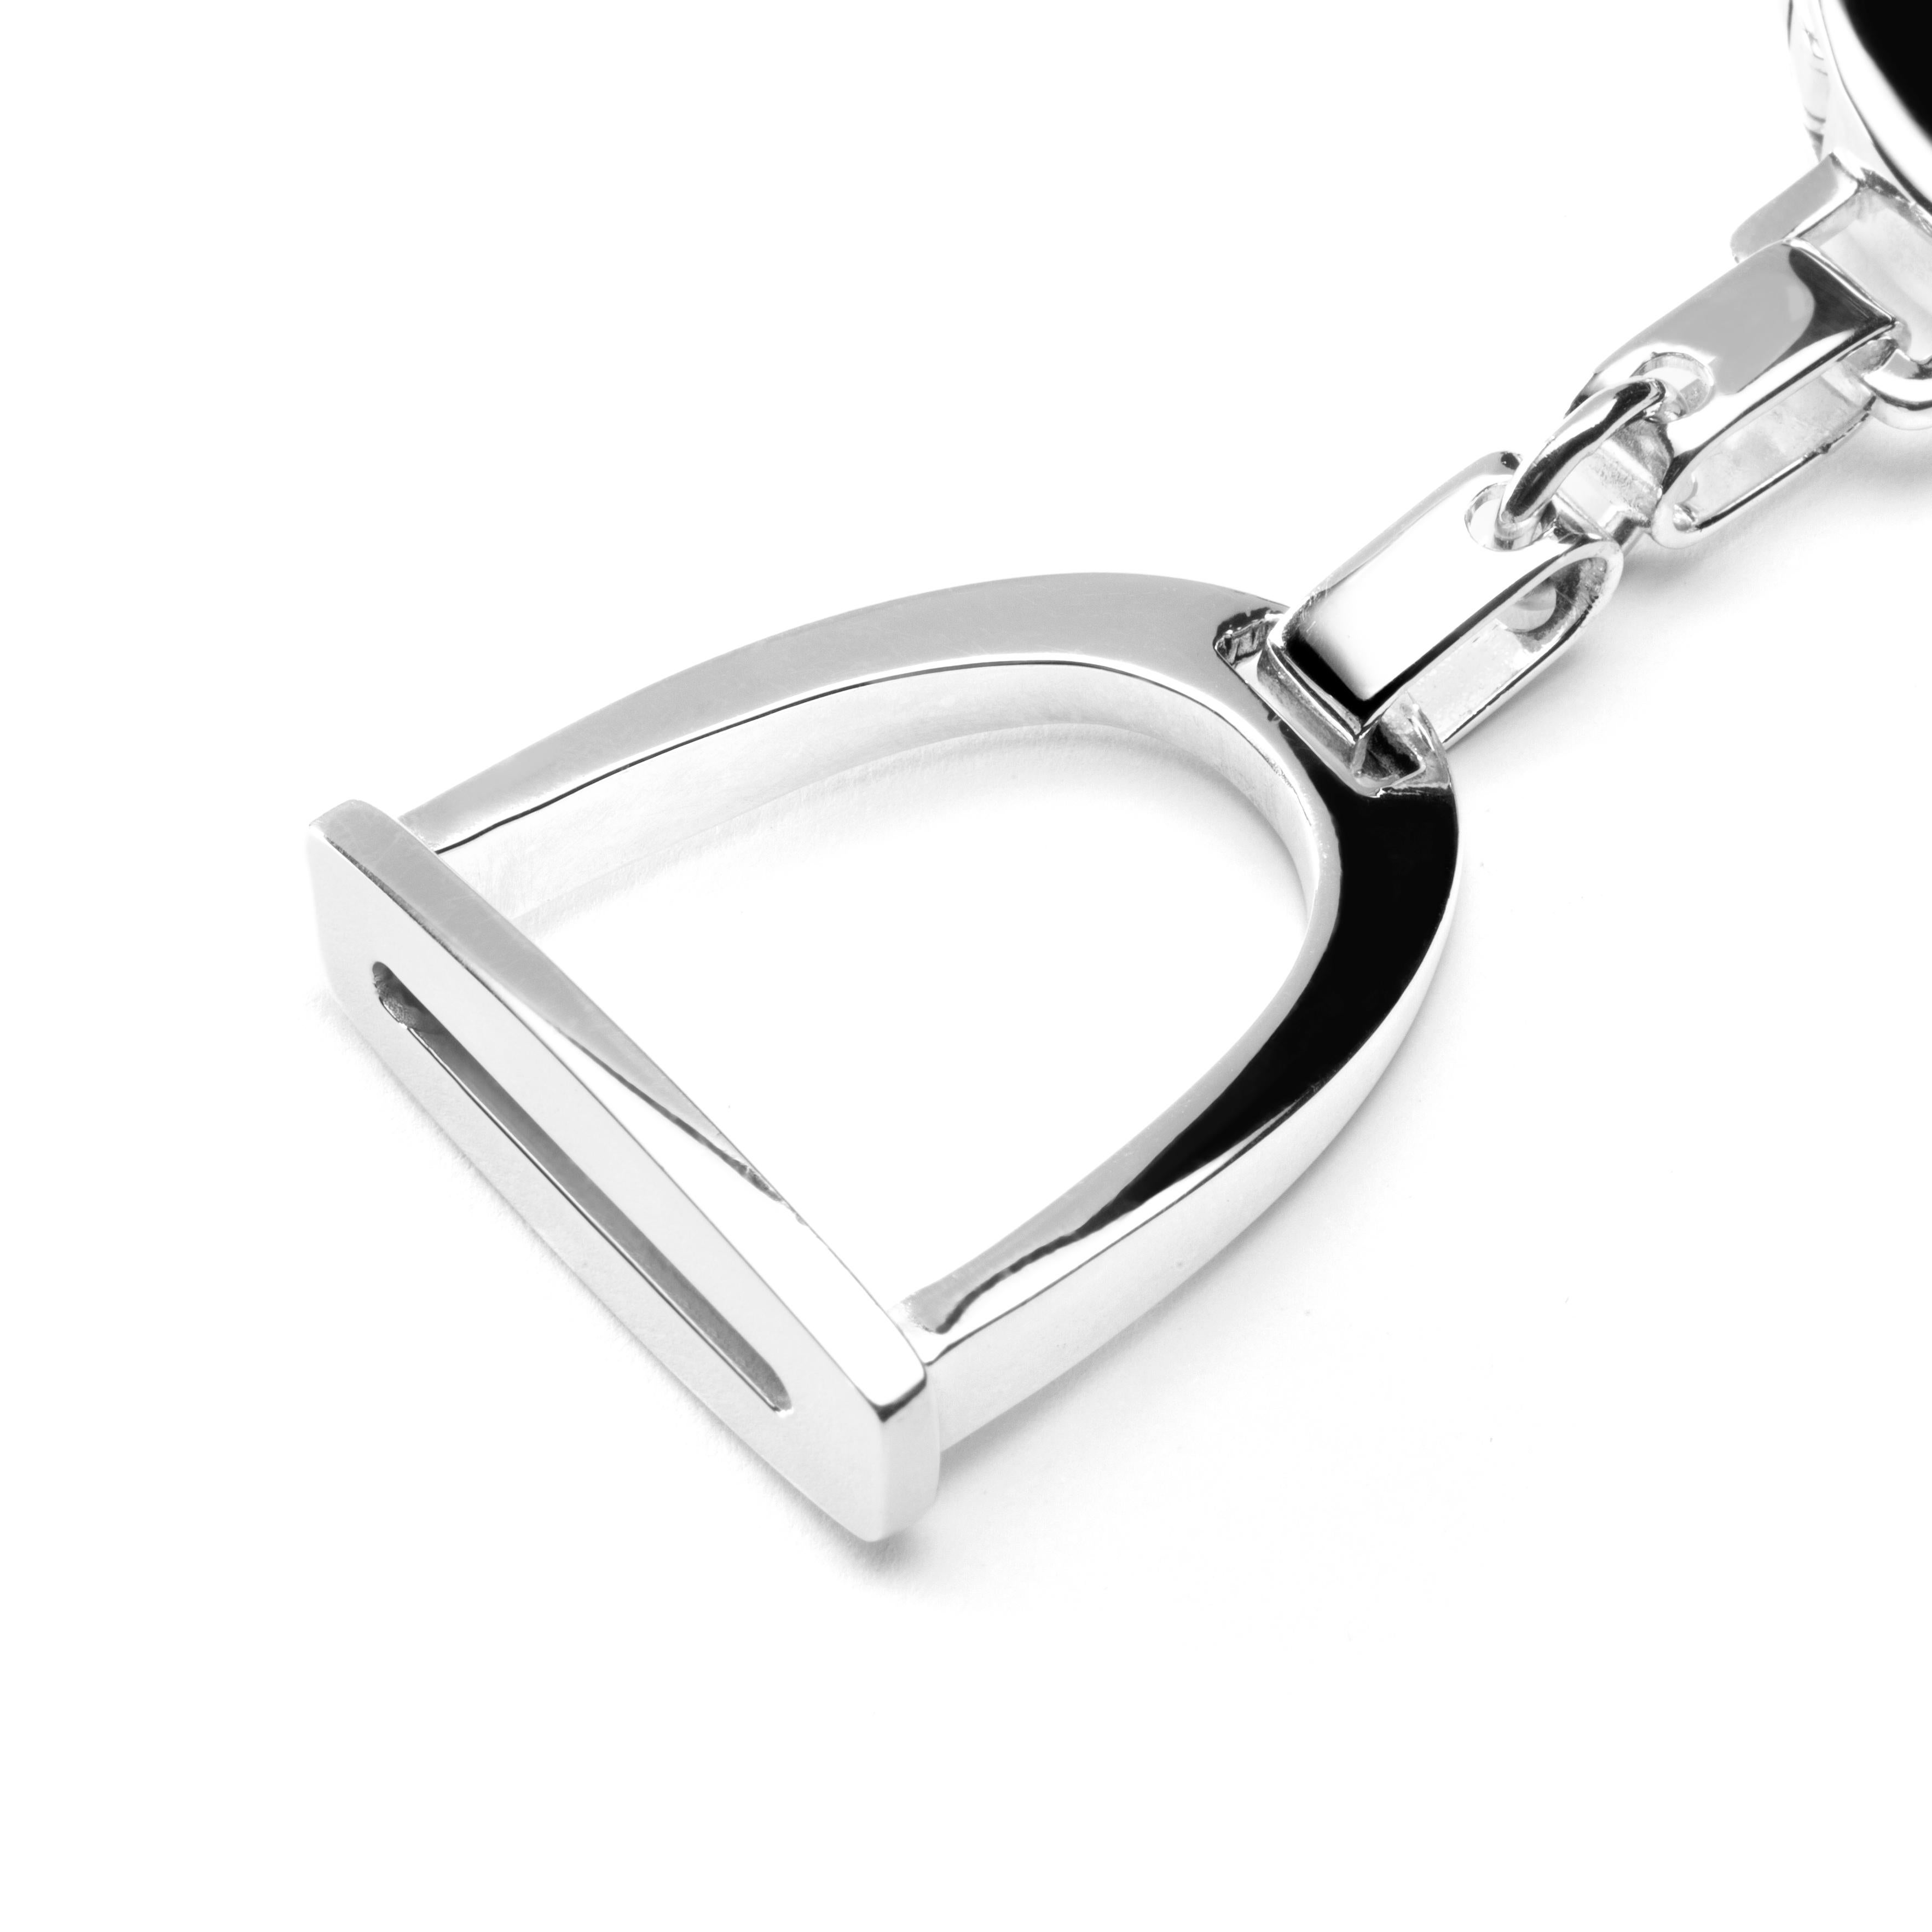 Alex Jona design collection, hand crafted in Italy, rhodium plated sterling stirrup key holder.
Dimensions : L x 3.44 in/ 87.60 mm - W x 1.05 in/ 26.81 mm.

Alex Jona gifts stand out, not only for their special design and for the excellent quality,